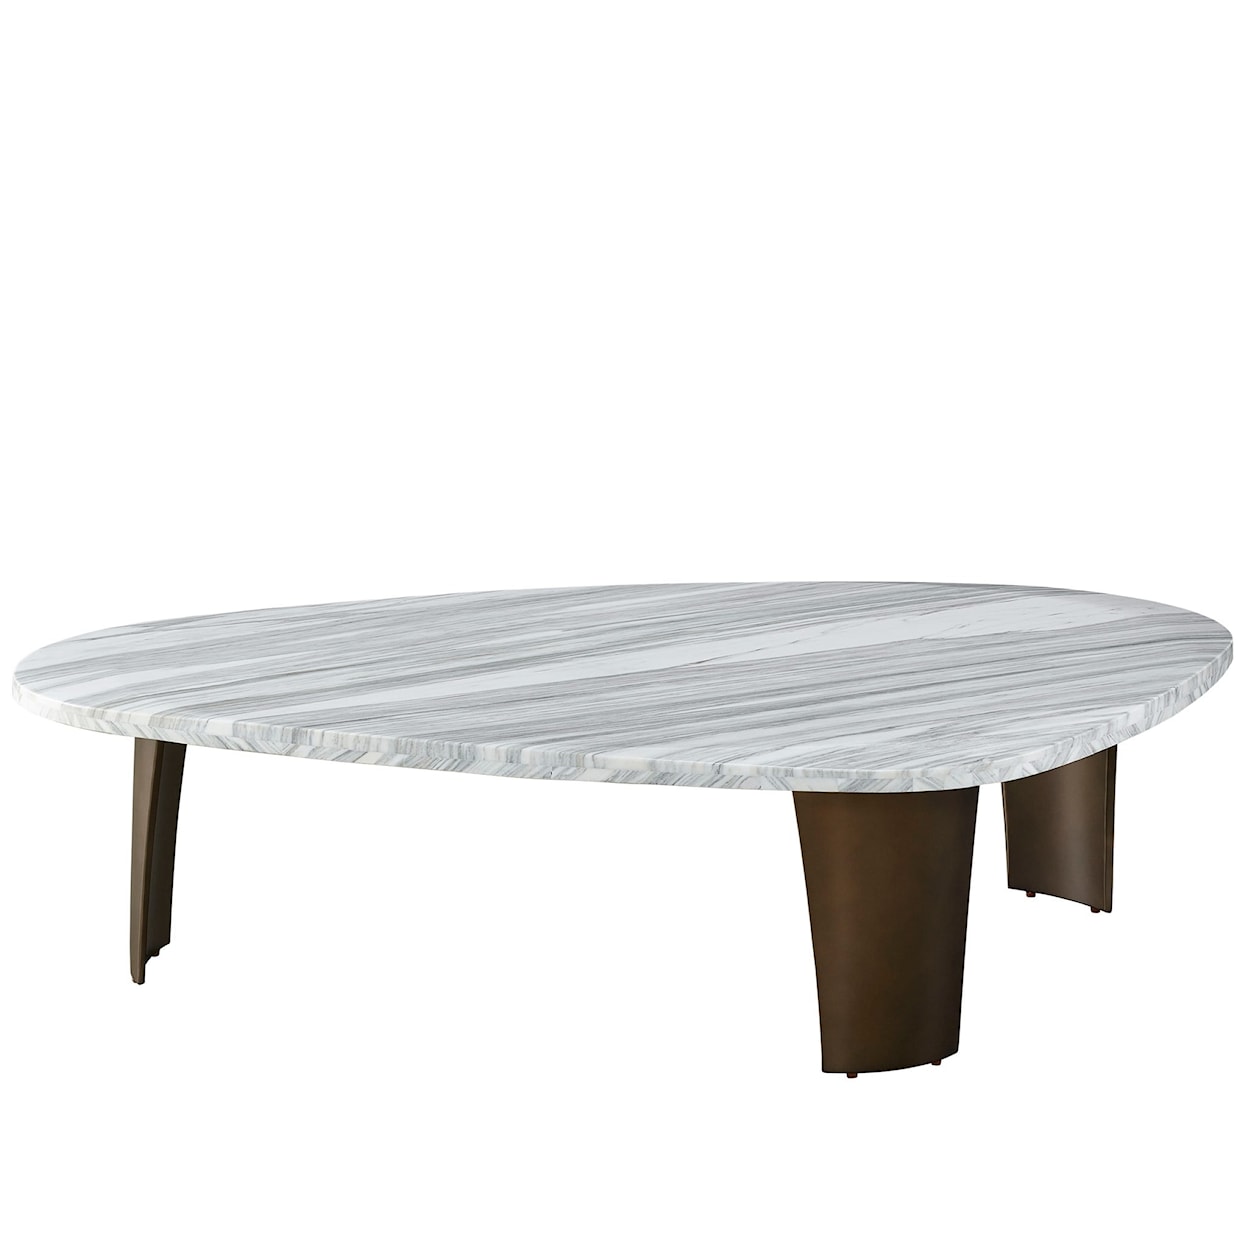 Universal ErinnV x Universal Stone Top Cocktail Table